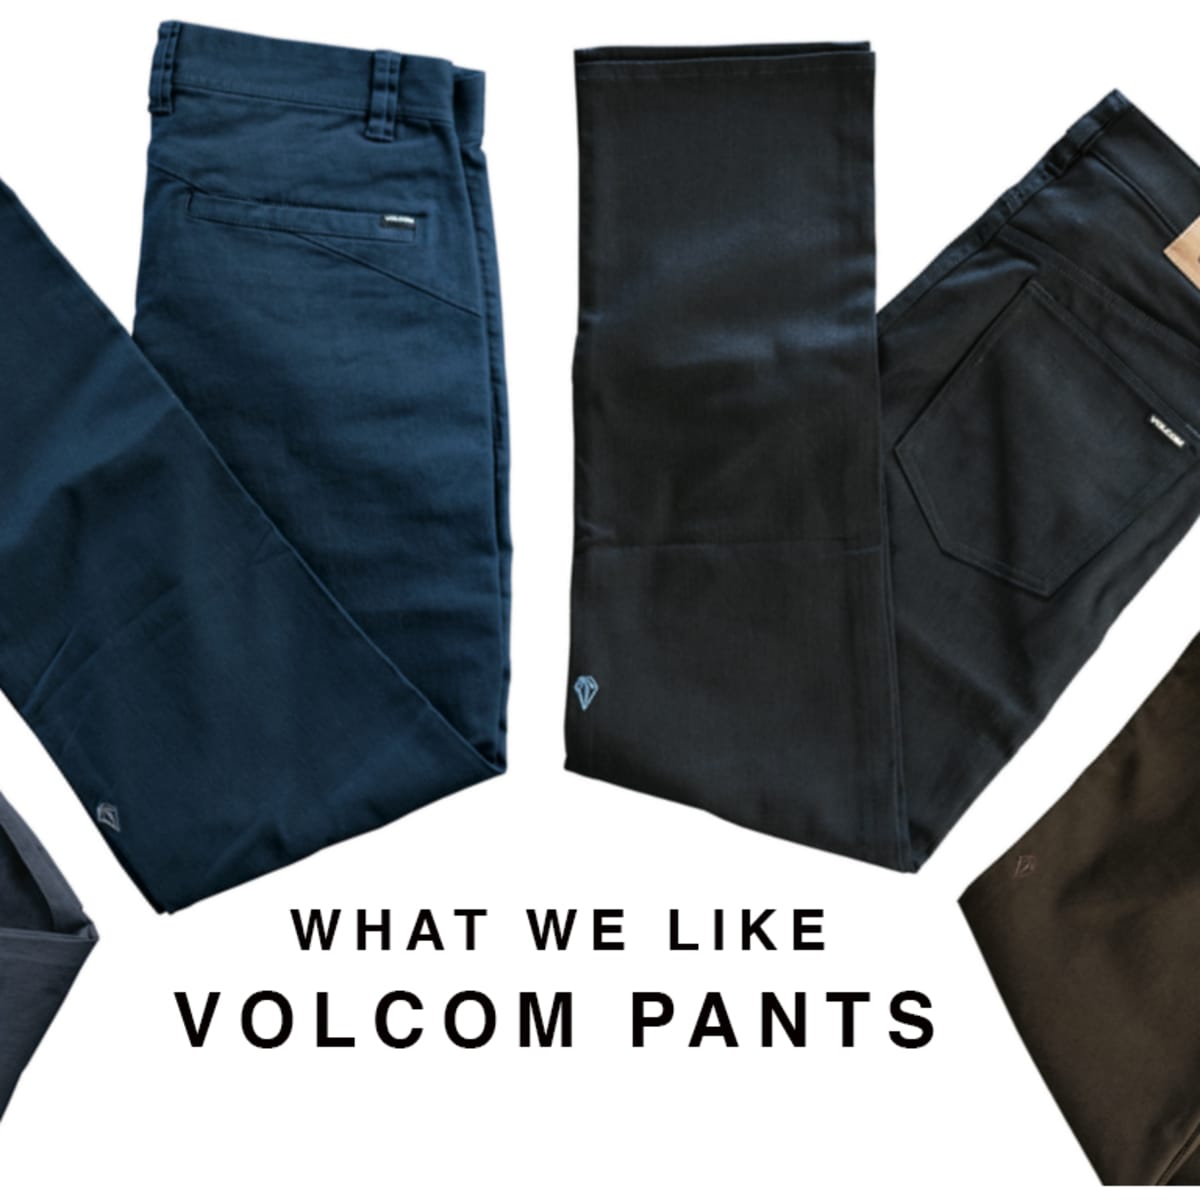 Toda Moda - 👖Volcom Brand 👖The Best Fit ..The Best Wash 👌🏻Available Now  🔥#todamoda #volcom